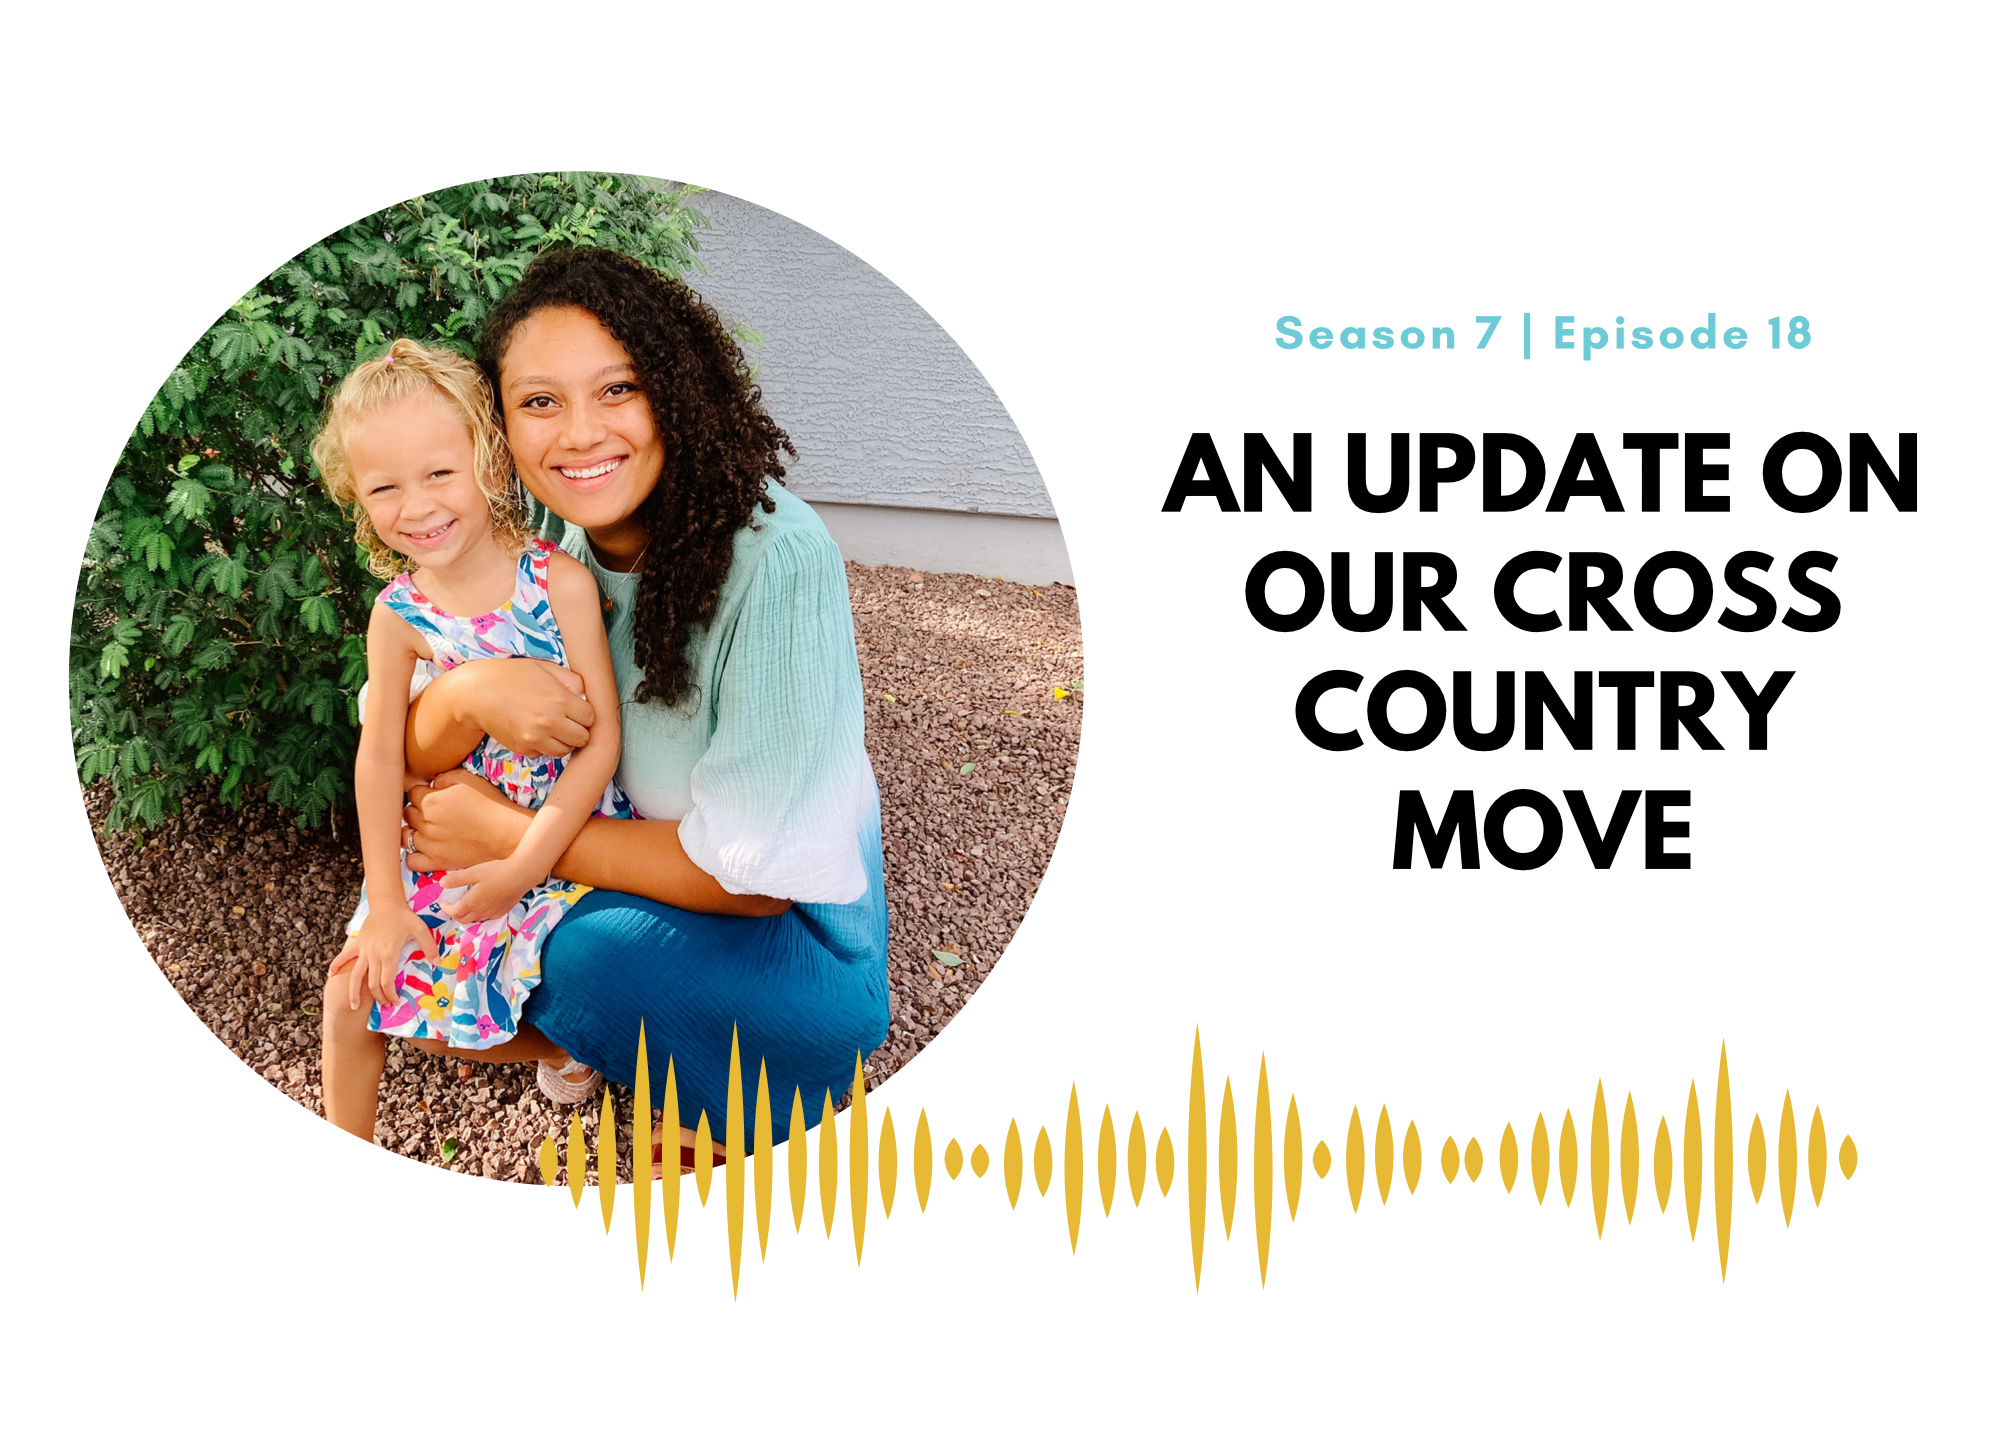 An Update on Our Cross Country Move